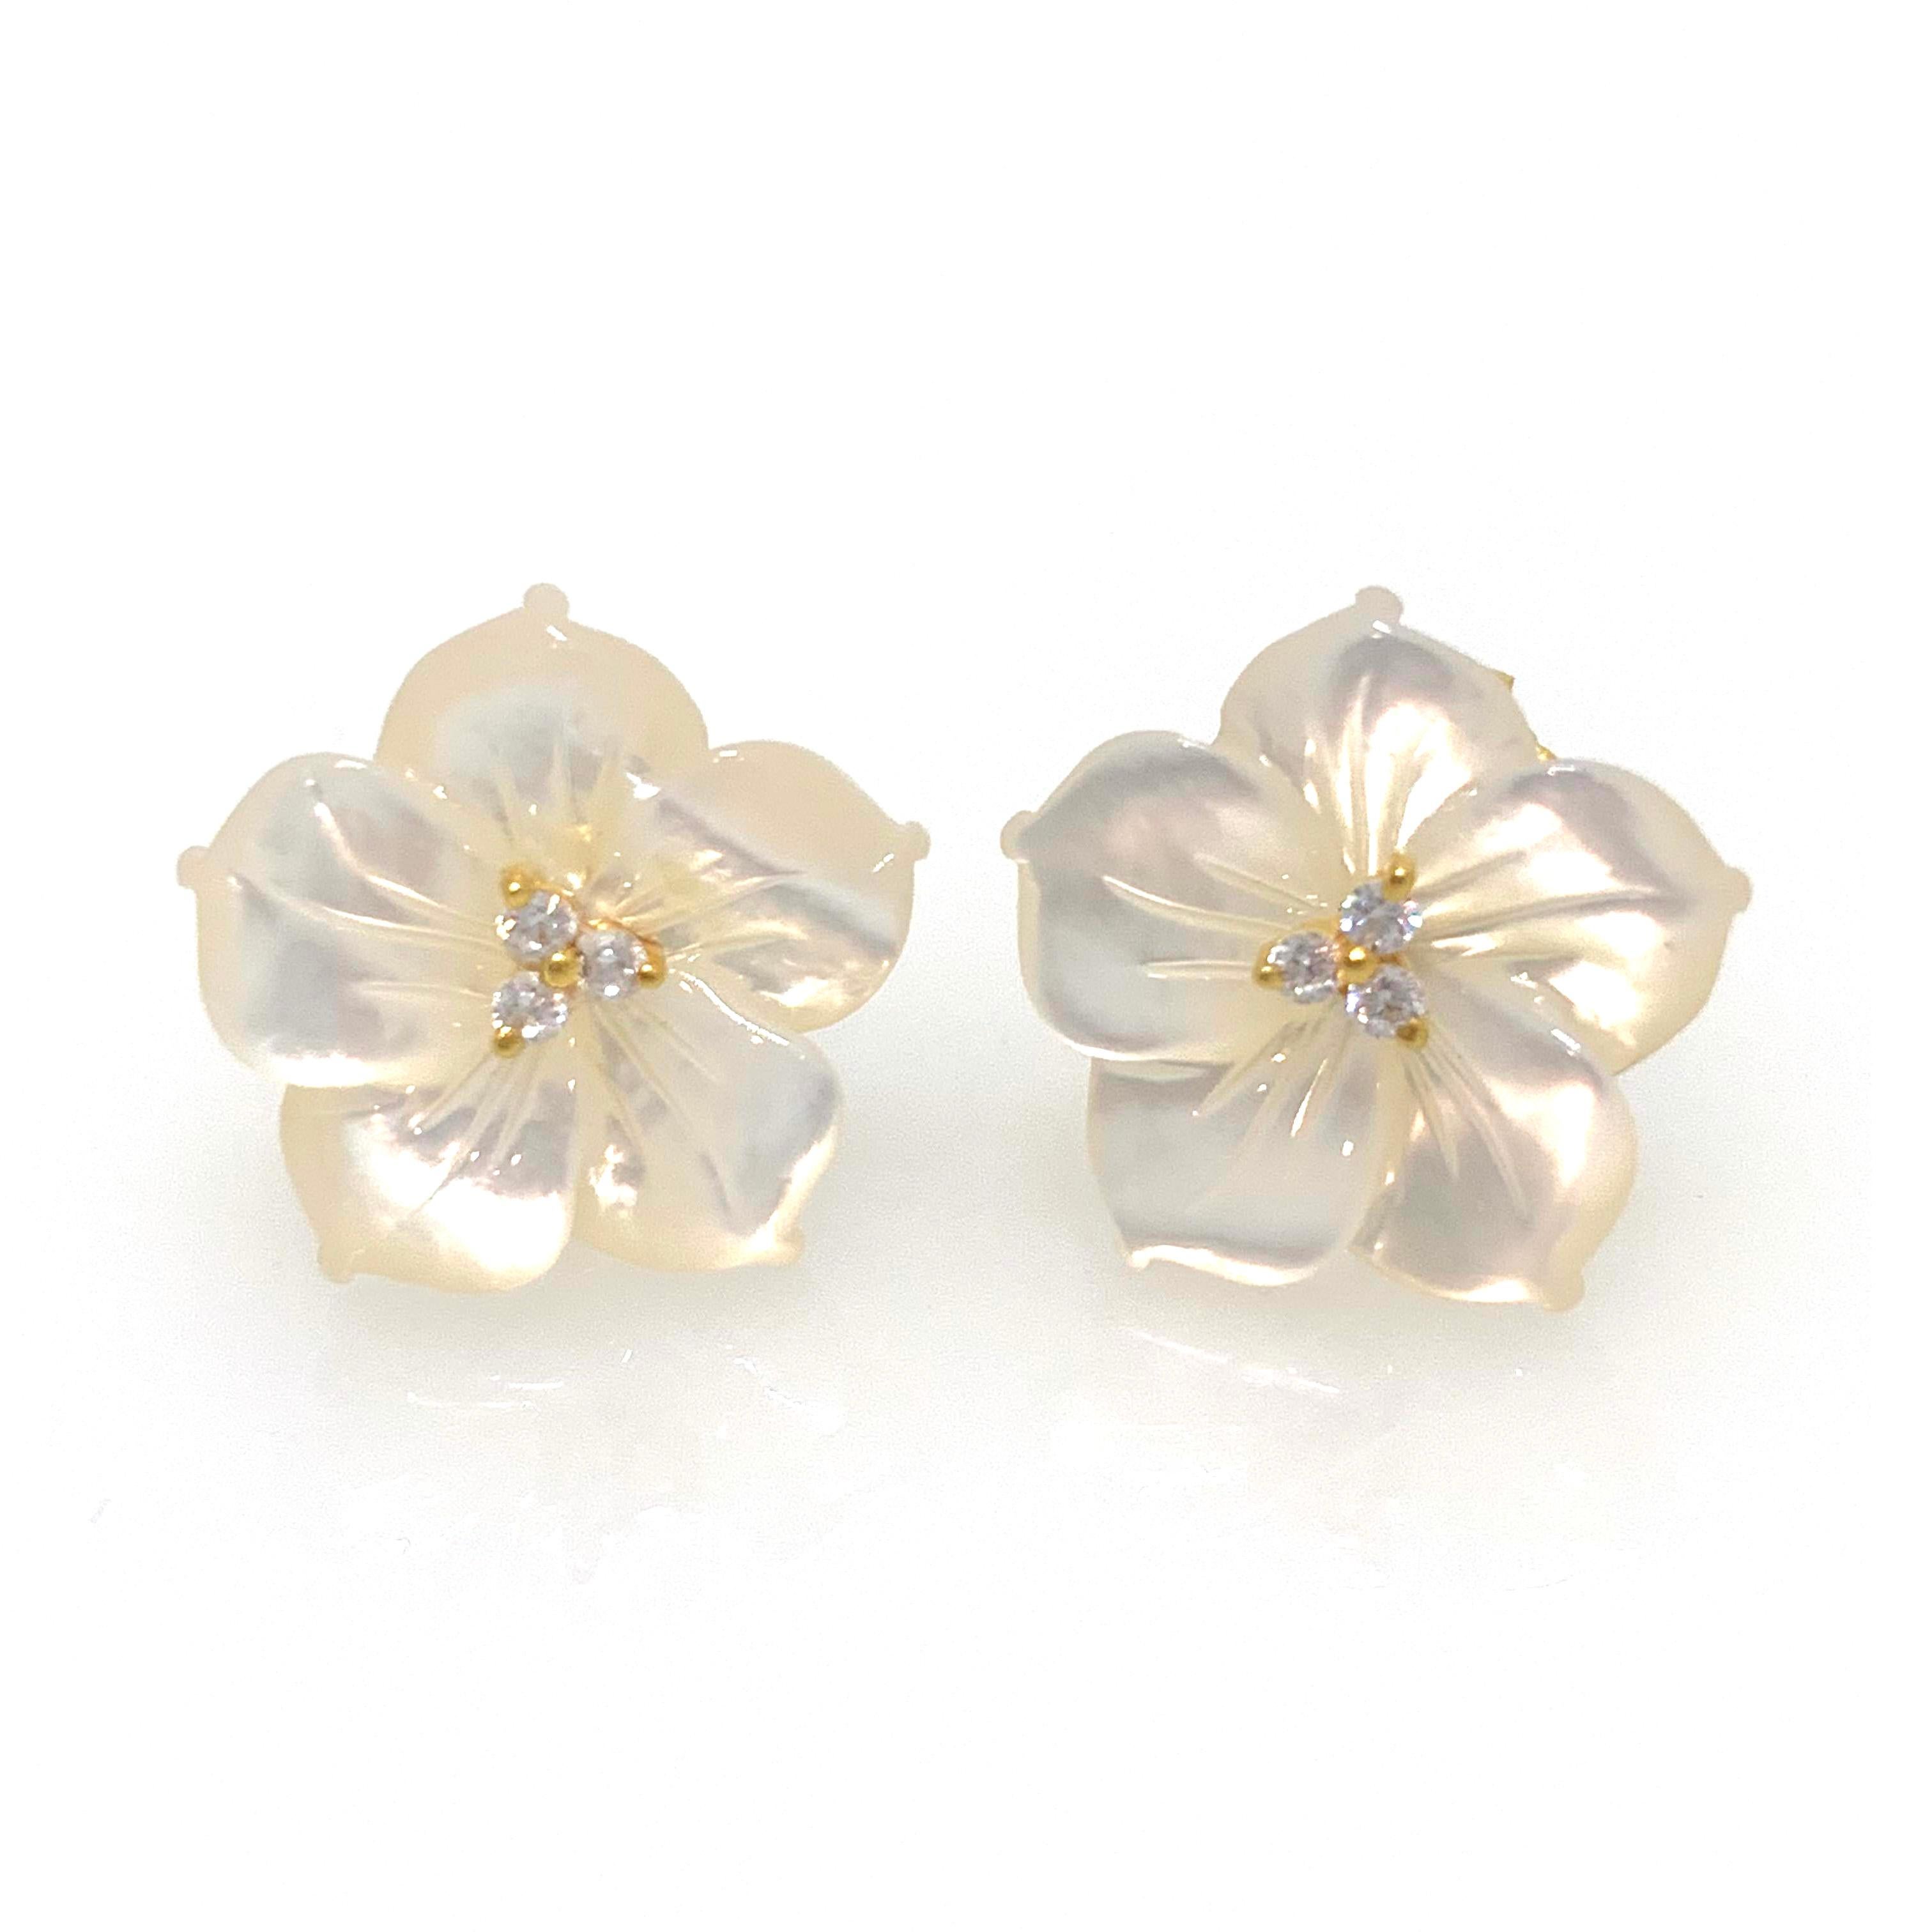 Elegant 18mm Carved Mother of Pearl Flower Sterling Silver Earrings

This earrings features 2 pieces of 18mm mother of pearl carved into beautiful three dimension flower, adorned with round simulated diamond cz, handset in 18k yellow gold vermeil